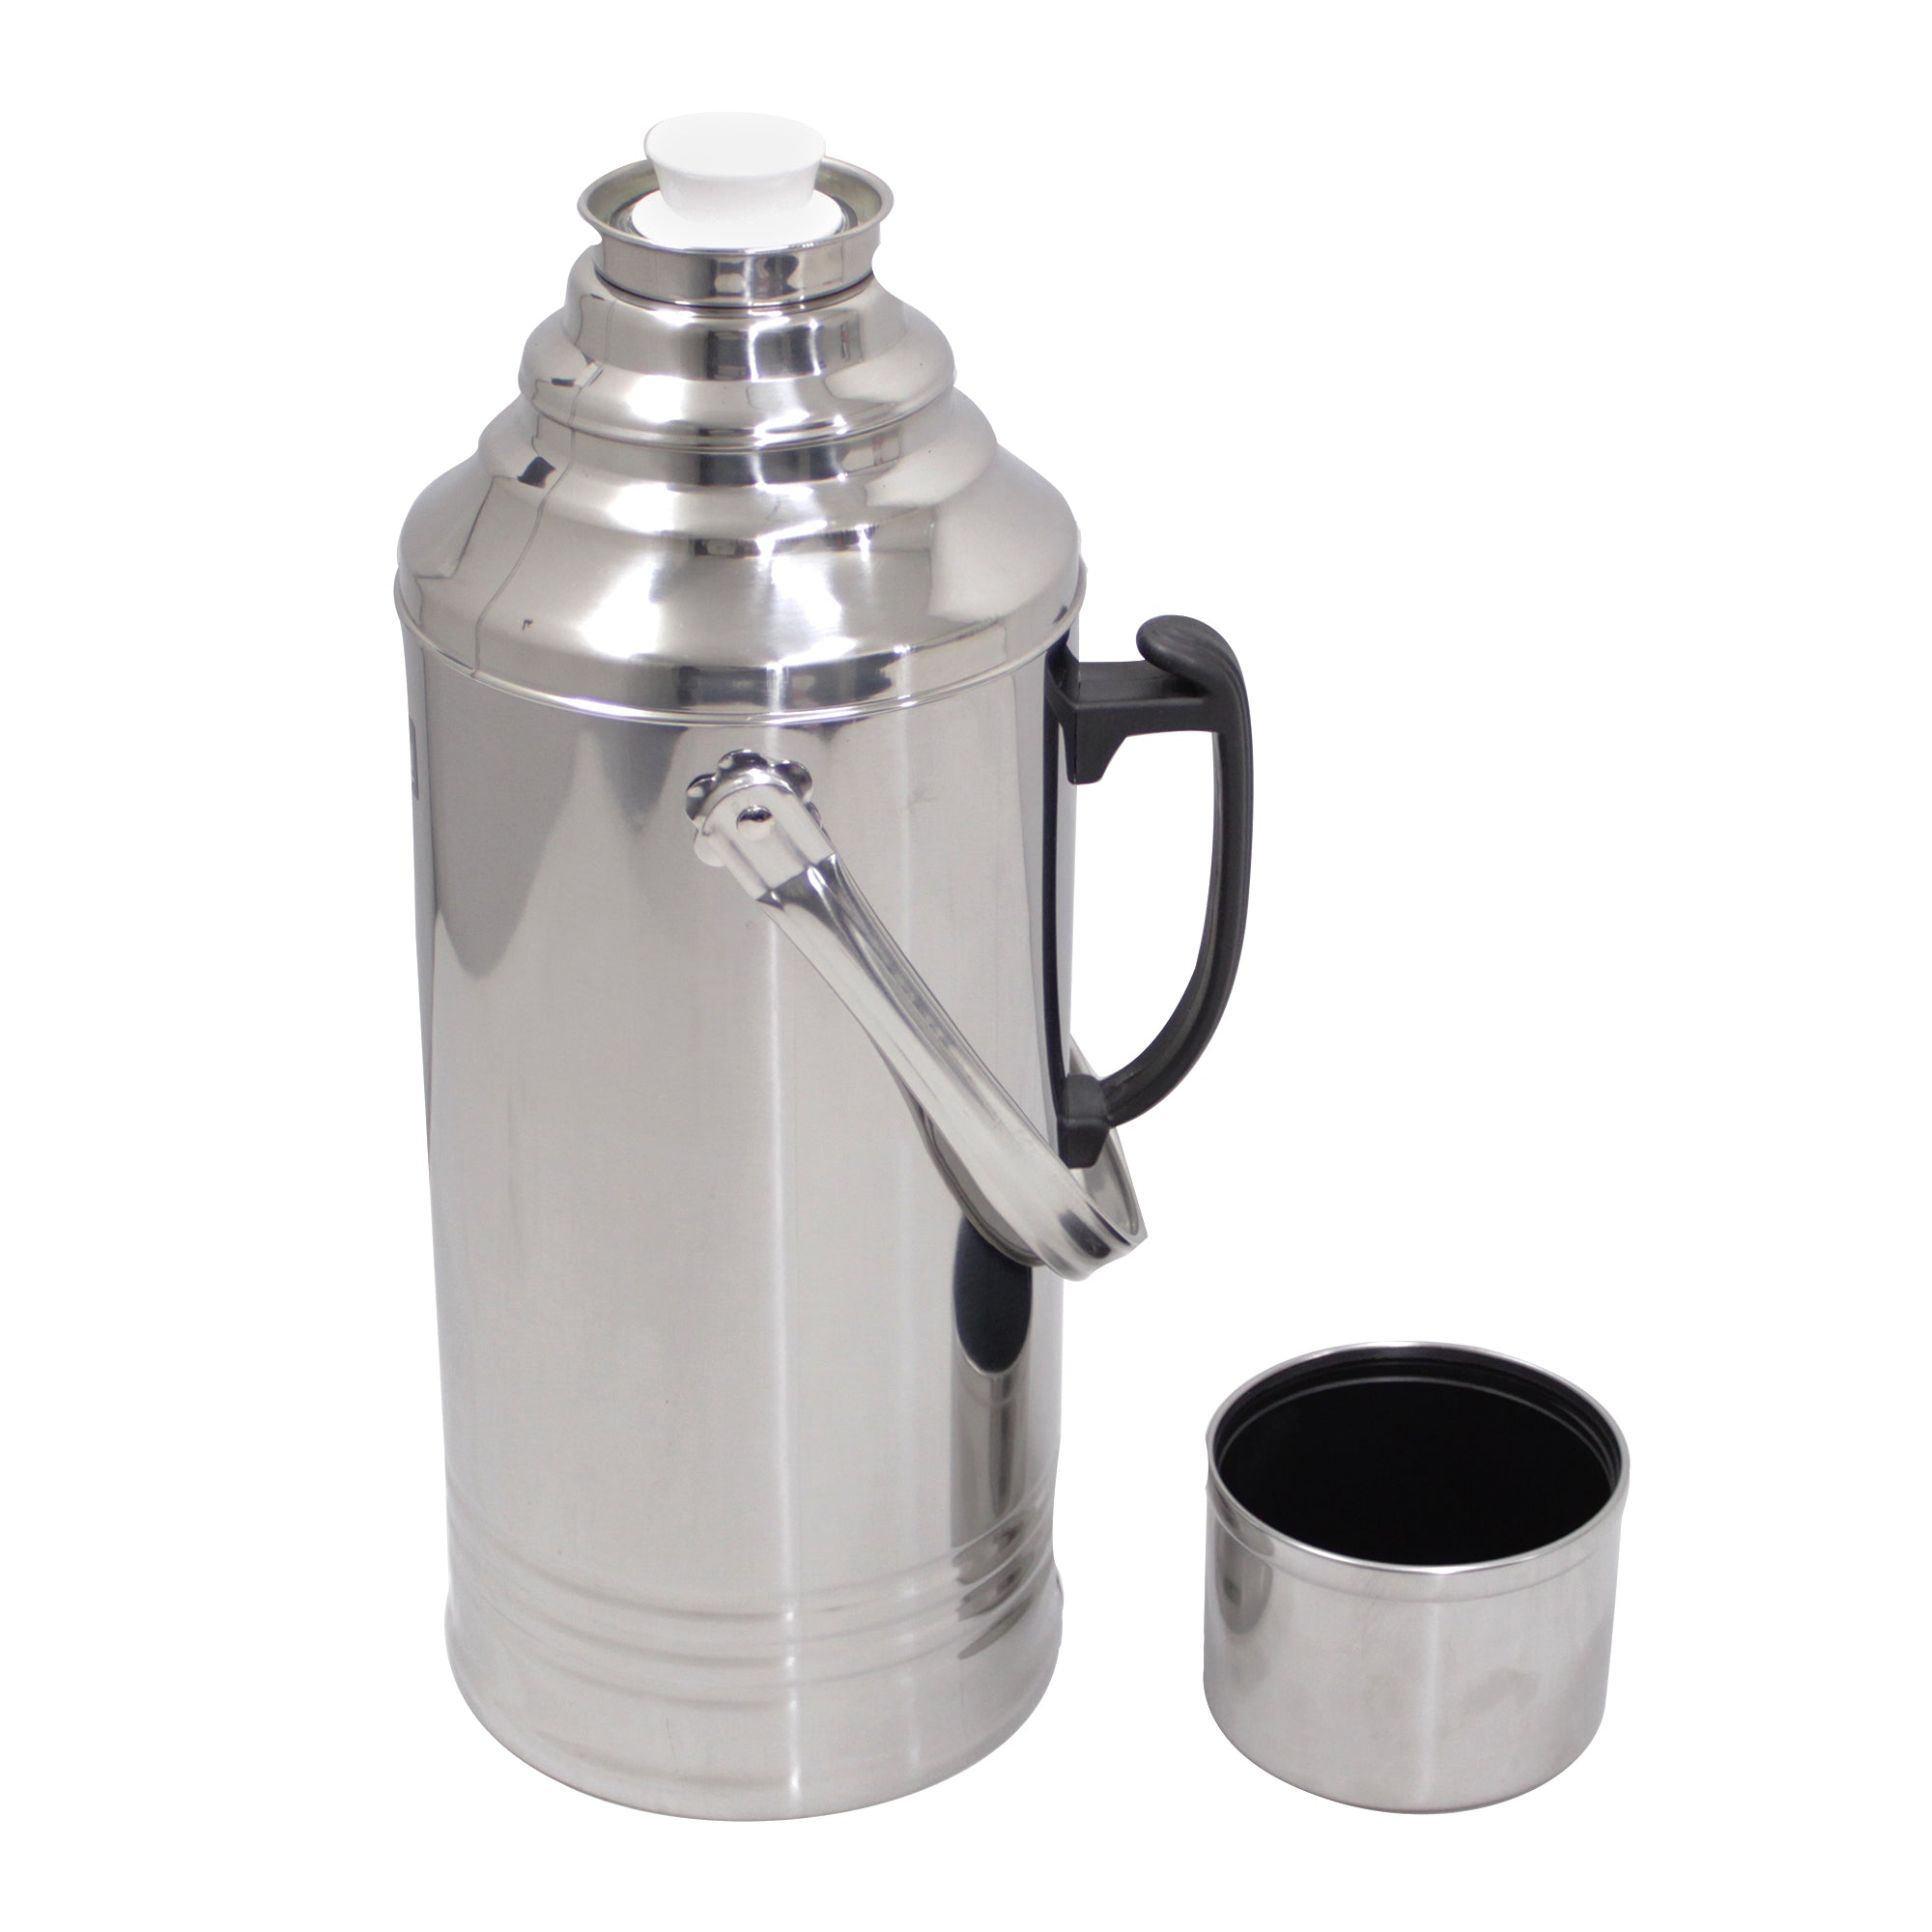 3.2L Steel Glass-Inner Vacuum Insulated Flask and 4.1 Litre Electric Kettle